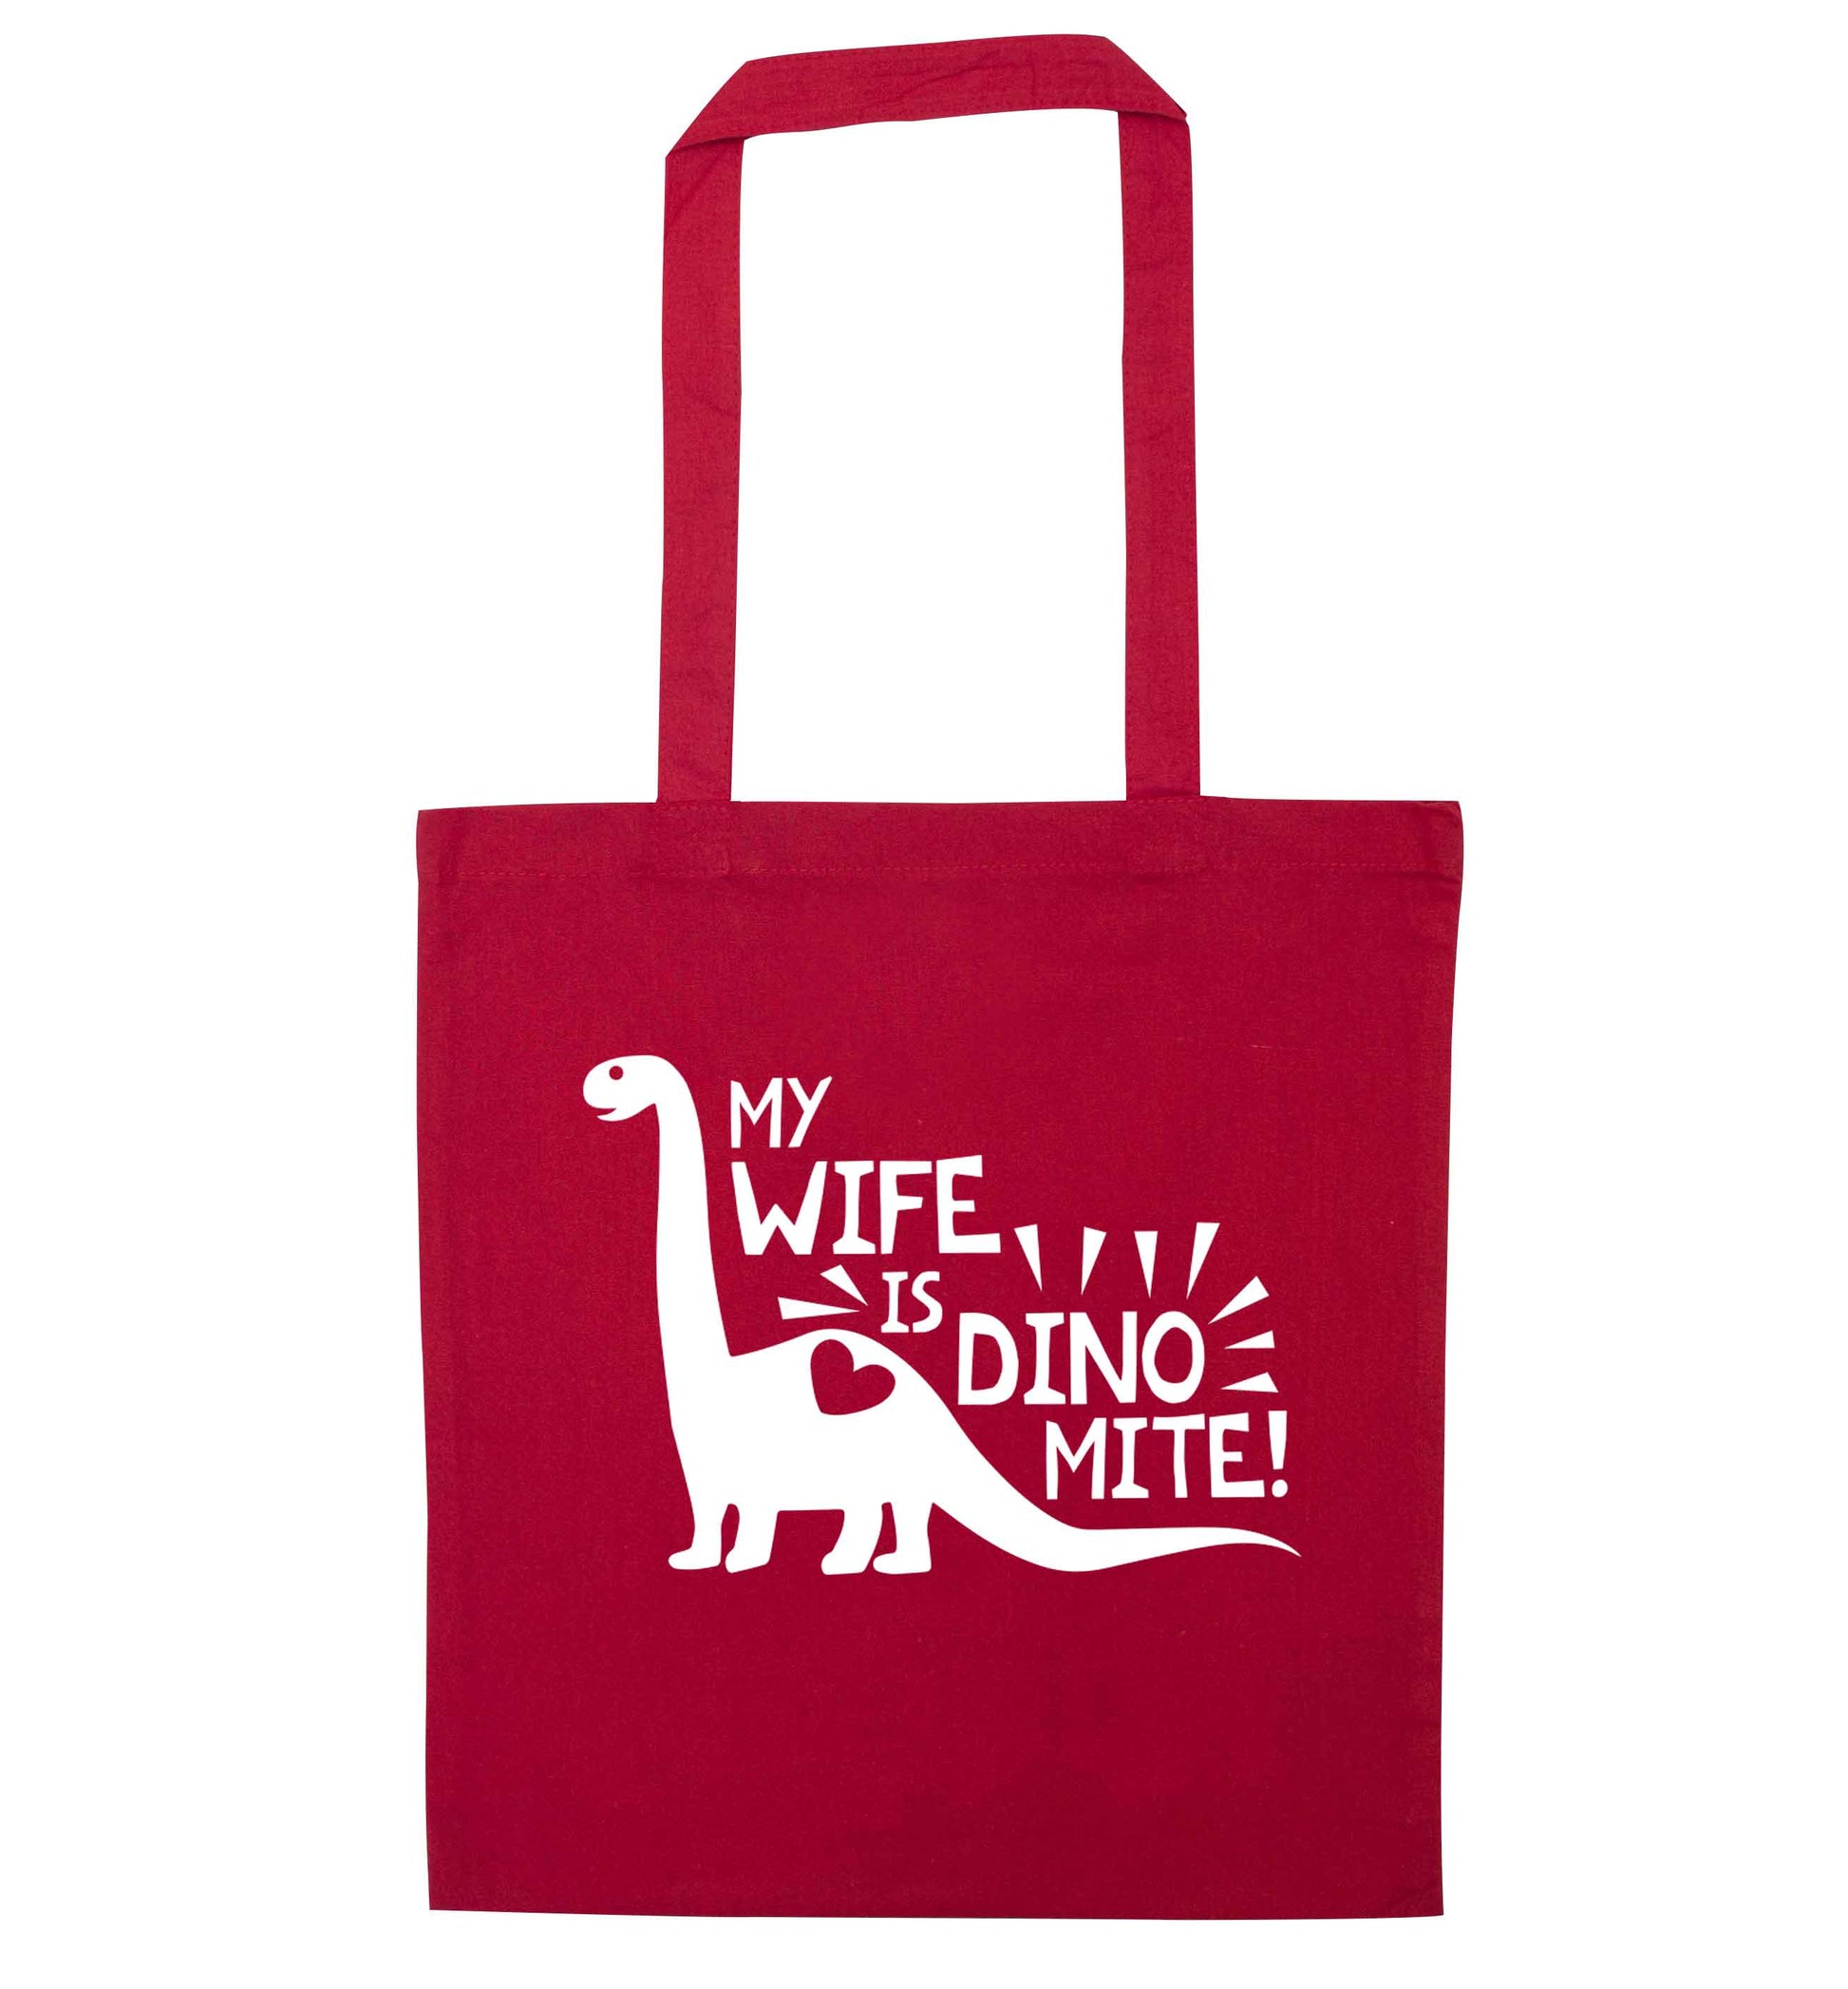 My wife is dinomite! red tote bag